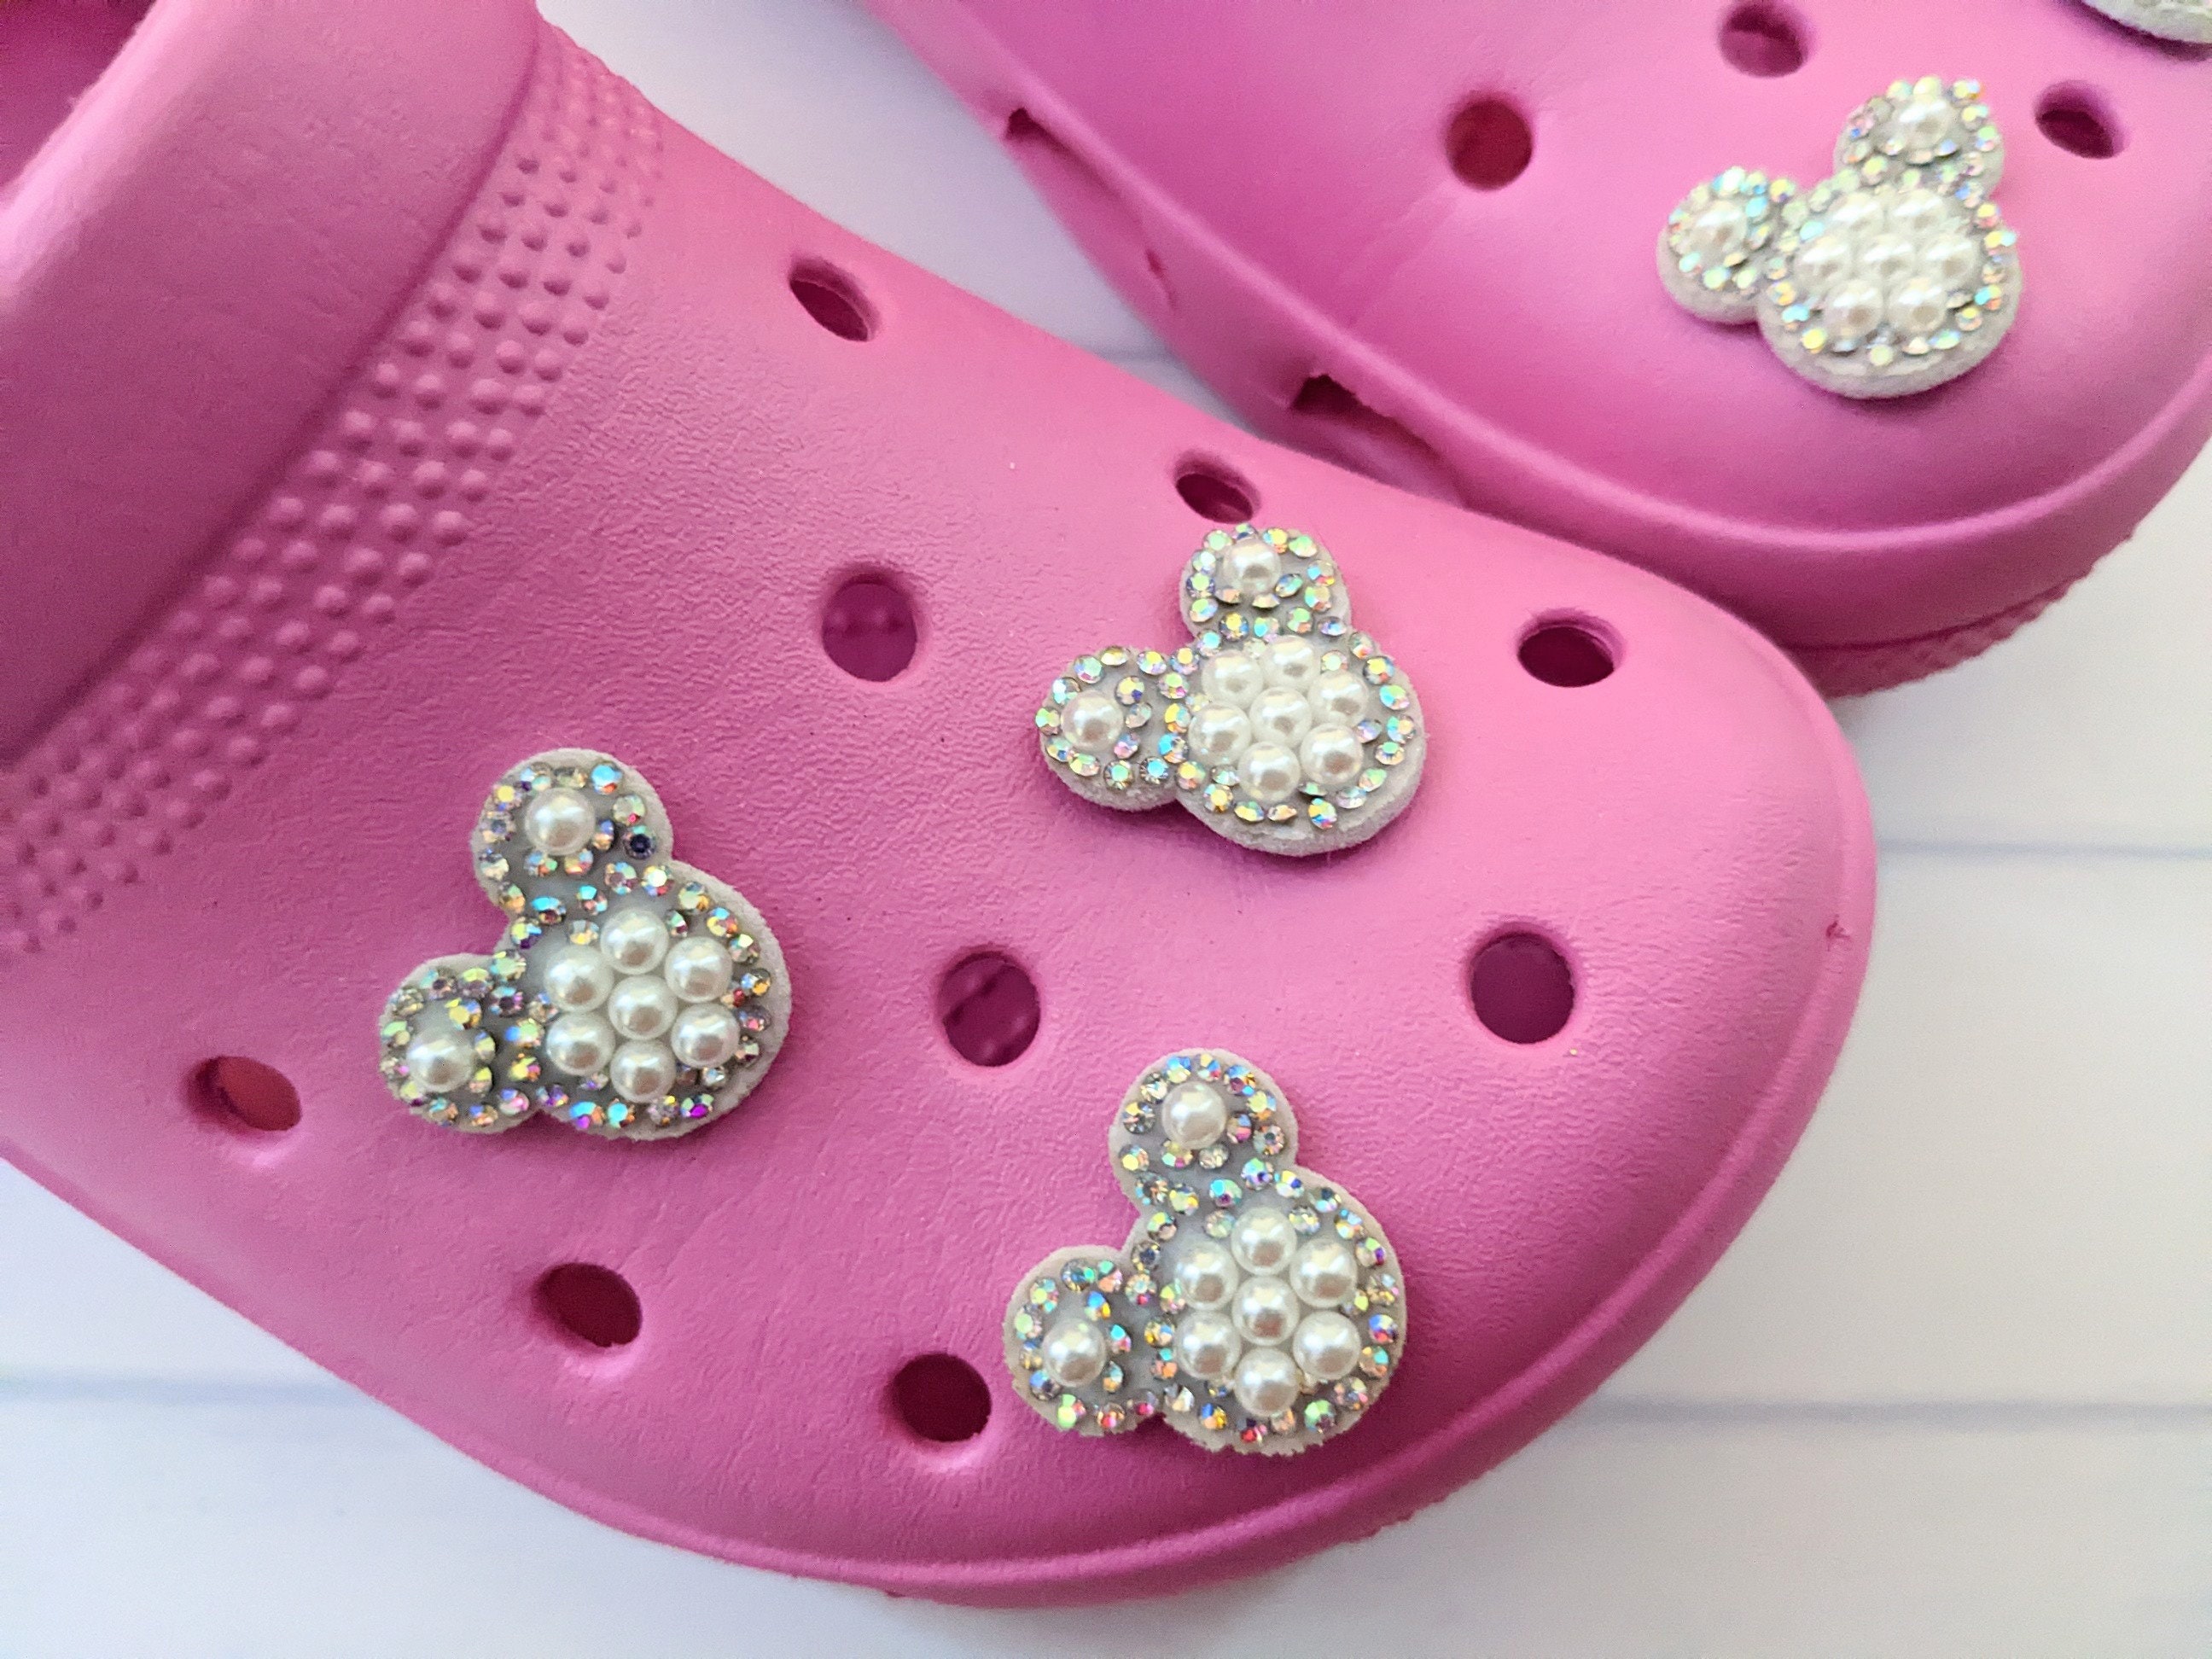 Do all kids' Crocs have such small holes? I felt like I was going to break  the Jibbitz or tear the Crocs. I'm looking for a pair for my son where we